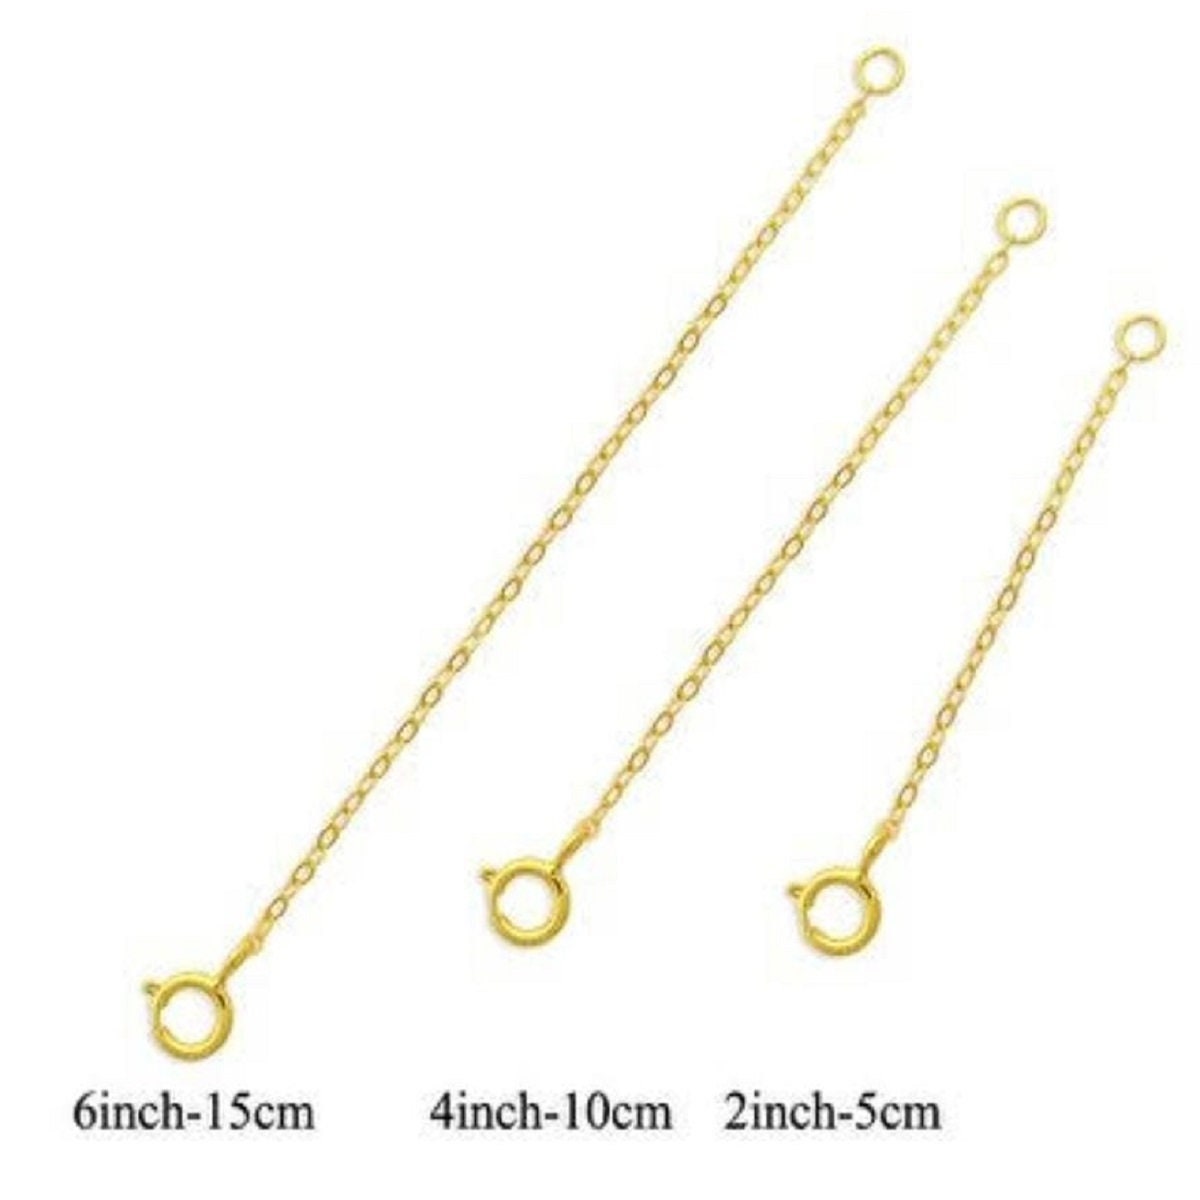 14K Real Gold Cuban Curb Chain Extender, 1 2 3 4 5 6 7 Inch Necklace  Bracelet Anklet Extension, Adjustable Removable Gourmet Chain Extender 